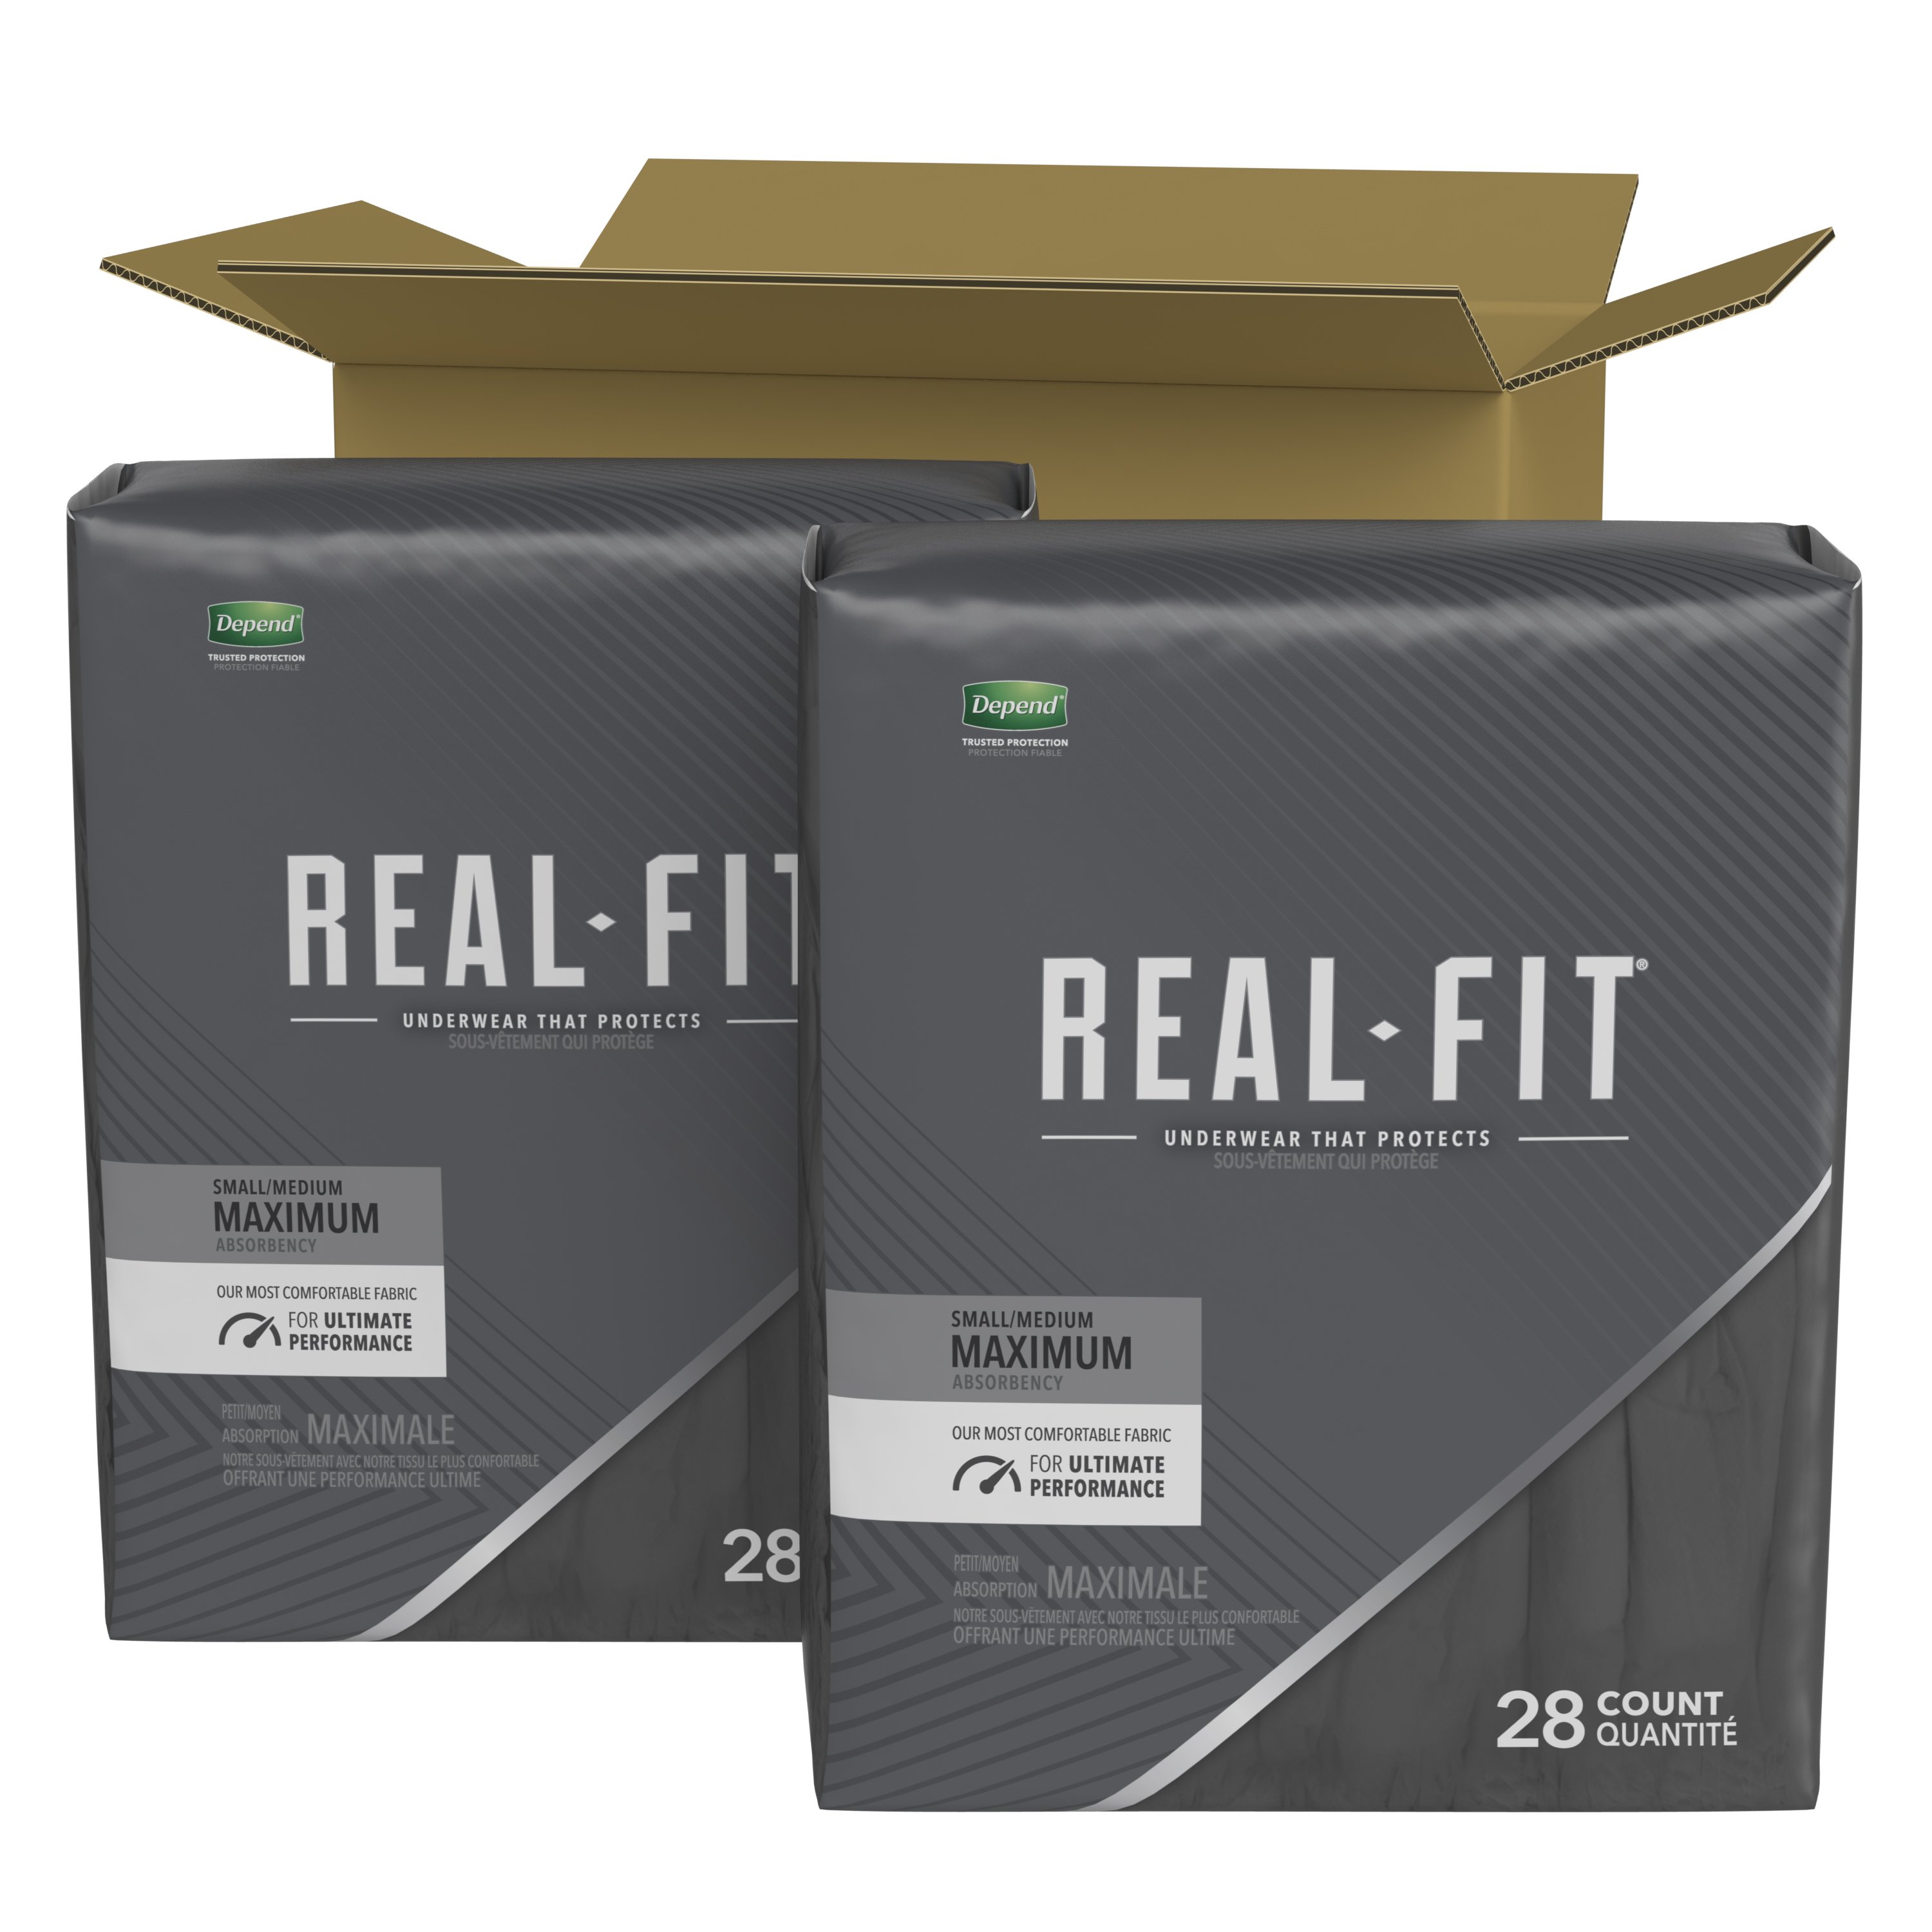 Depend Real Fit Incontinence Underwear for Men, Maximum Absorbency, Small/Medium, Black, 56 Ct (Pack of 2 | Total of 112 ct) - image 2 of 3